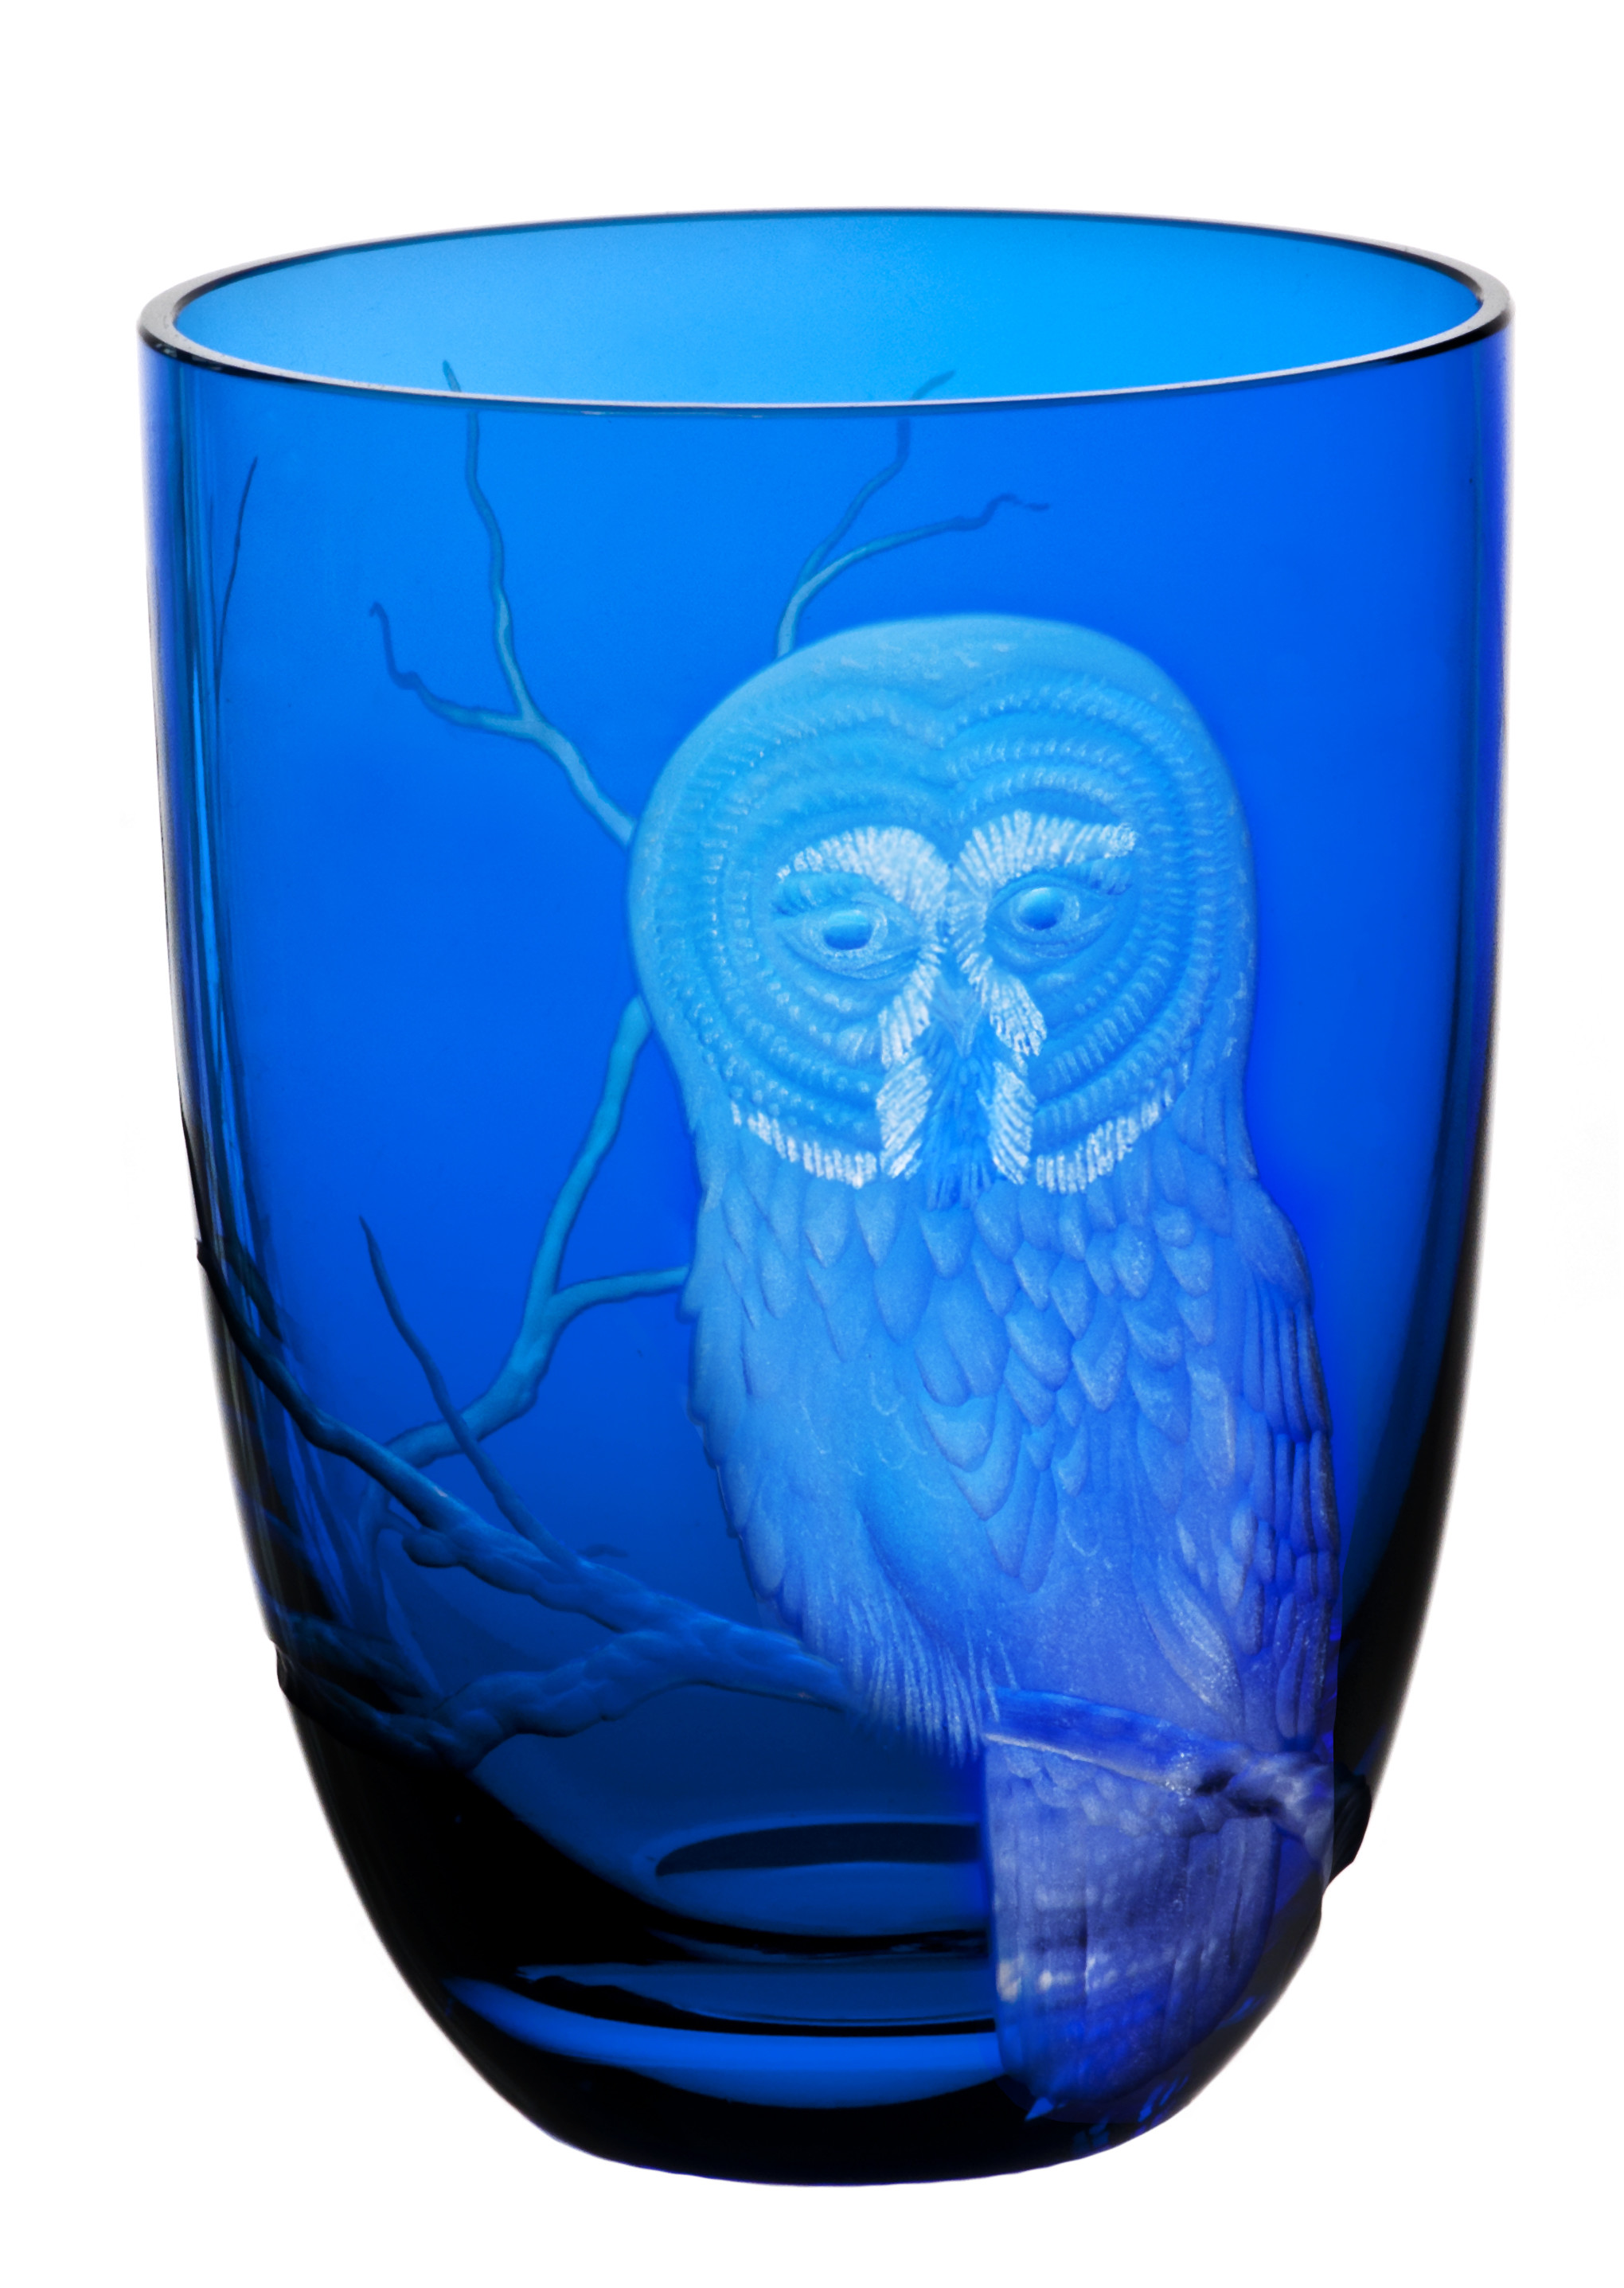 13 Fabulous Blue Glass Owl Vase 2024 free download blue glass owl vase of tumbler tawny owl height 102 mm cobalt blue from the series for tumbler tawny owl height 102 mm cobalt blue from the series planet earth crystal glass decoration livin